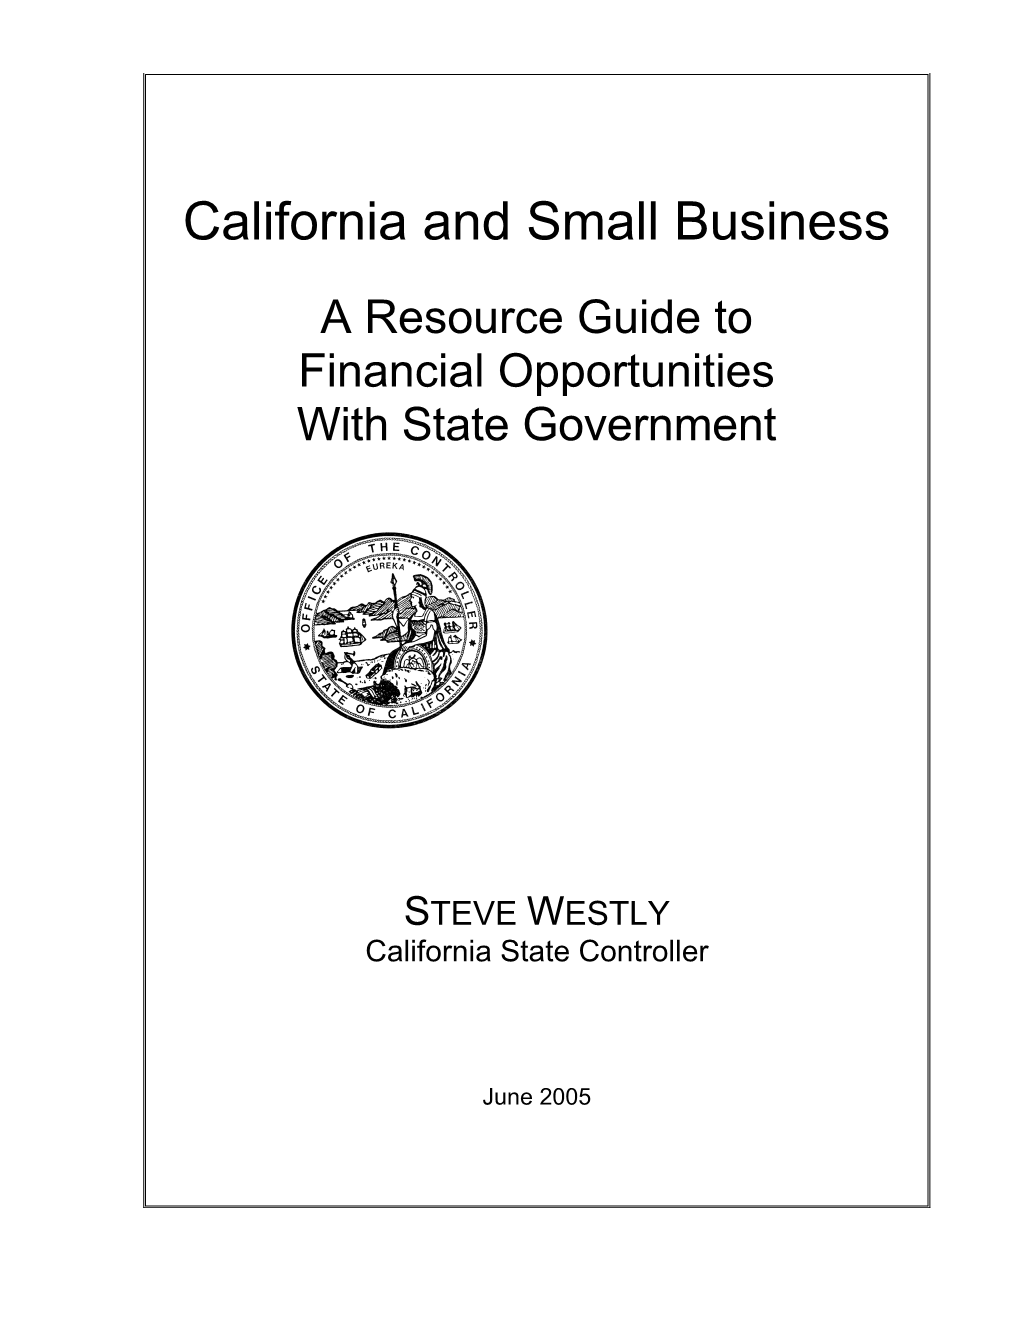 Financial Opportunities Available To California Small Businesses